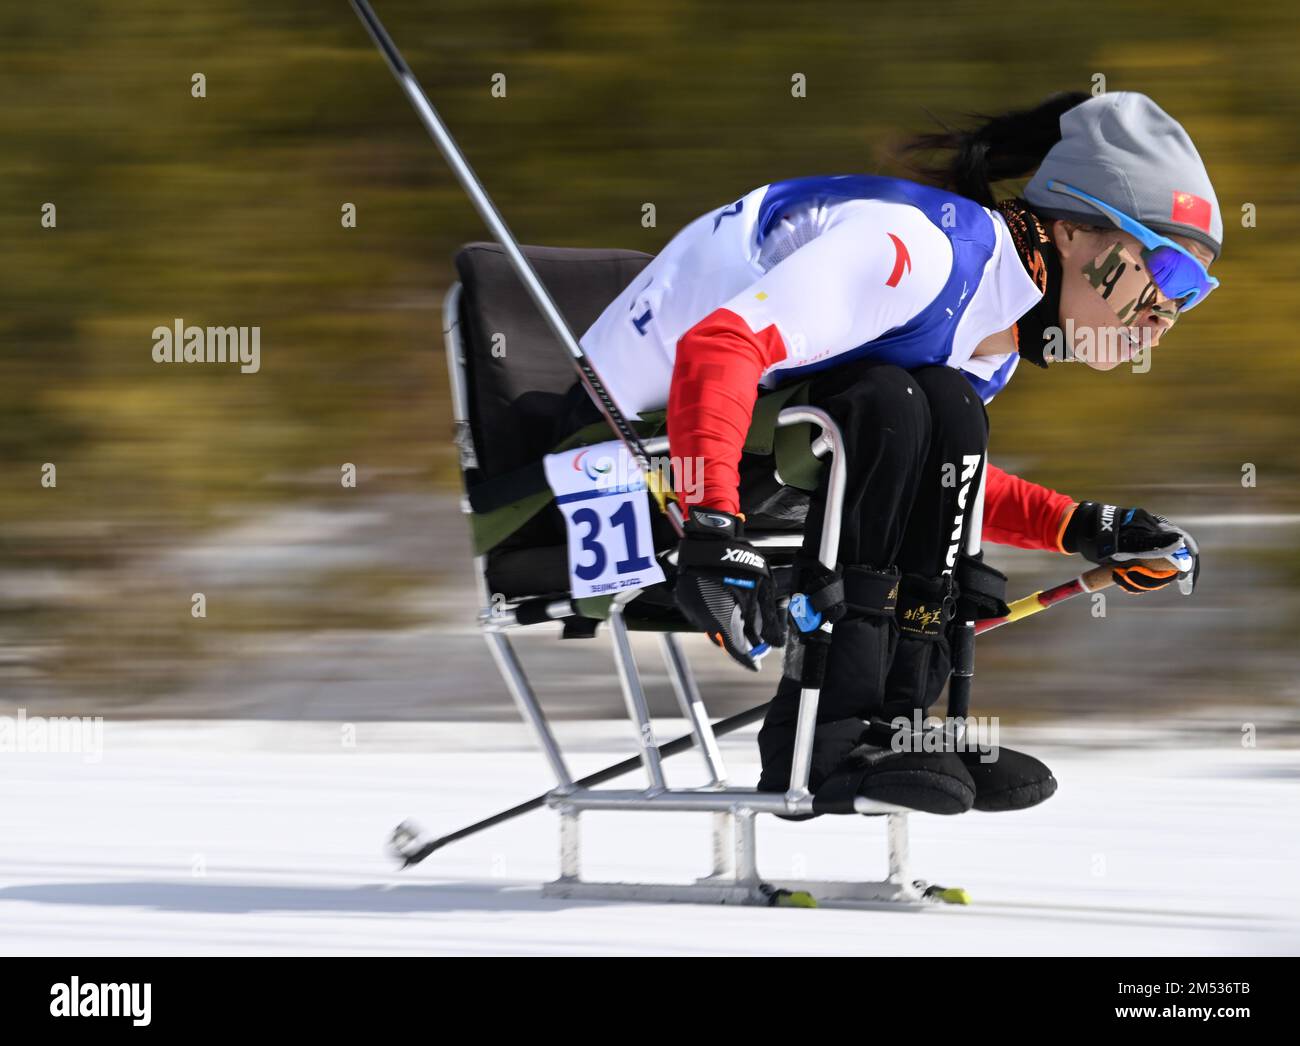 (221225) -- BEIJING, Dec. 25, 2022 (Xinhua) -- File photo taken on March 6, 2022 shows Yang Hongqiong of China competes during during the Para Cross-Country Skiing Women's Long Distance Sitting of Beijing 2022 Winter Paralympics at National Biathlon Center in Zhangjiakou, north China's Hebei Province. Yang won three gold medals in the sprint, middle, and long distance sitting at the Beijing 2022 Paralympic Winter Games. The 33-year-old Paralympic debutant became the most decorated Chinese Para-Olympian and was named the flag bearer of the Chinese delegation at the closing ceremony of the Beiji Stock Photo